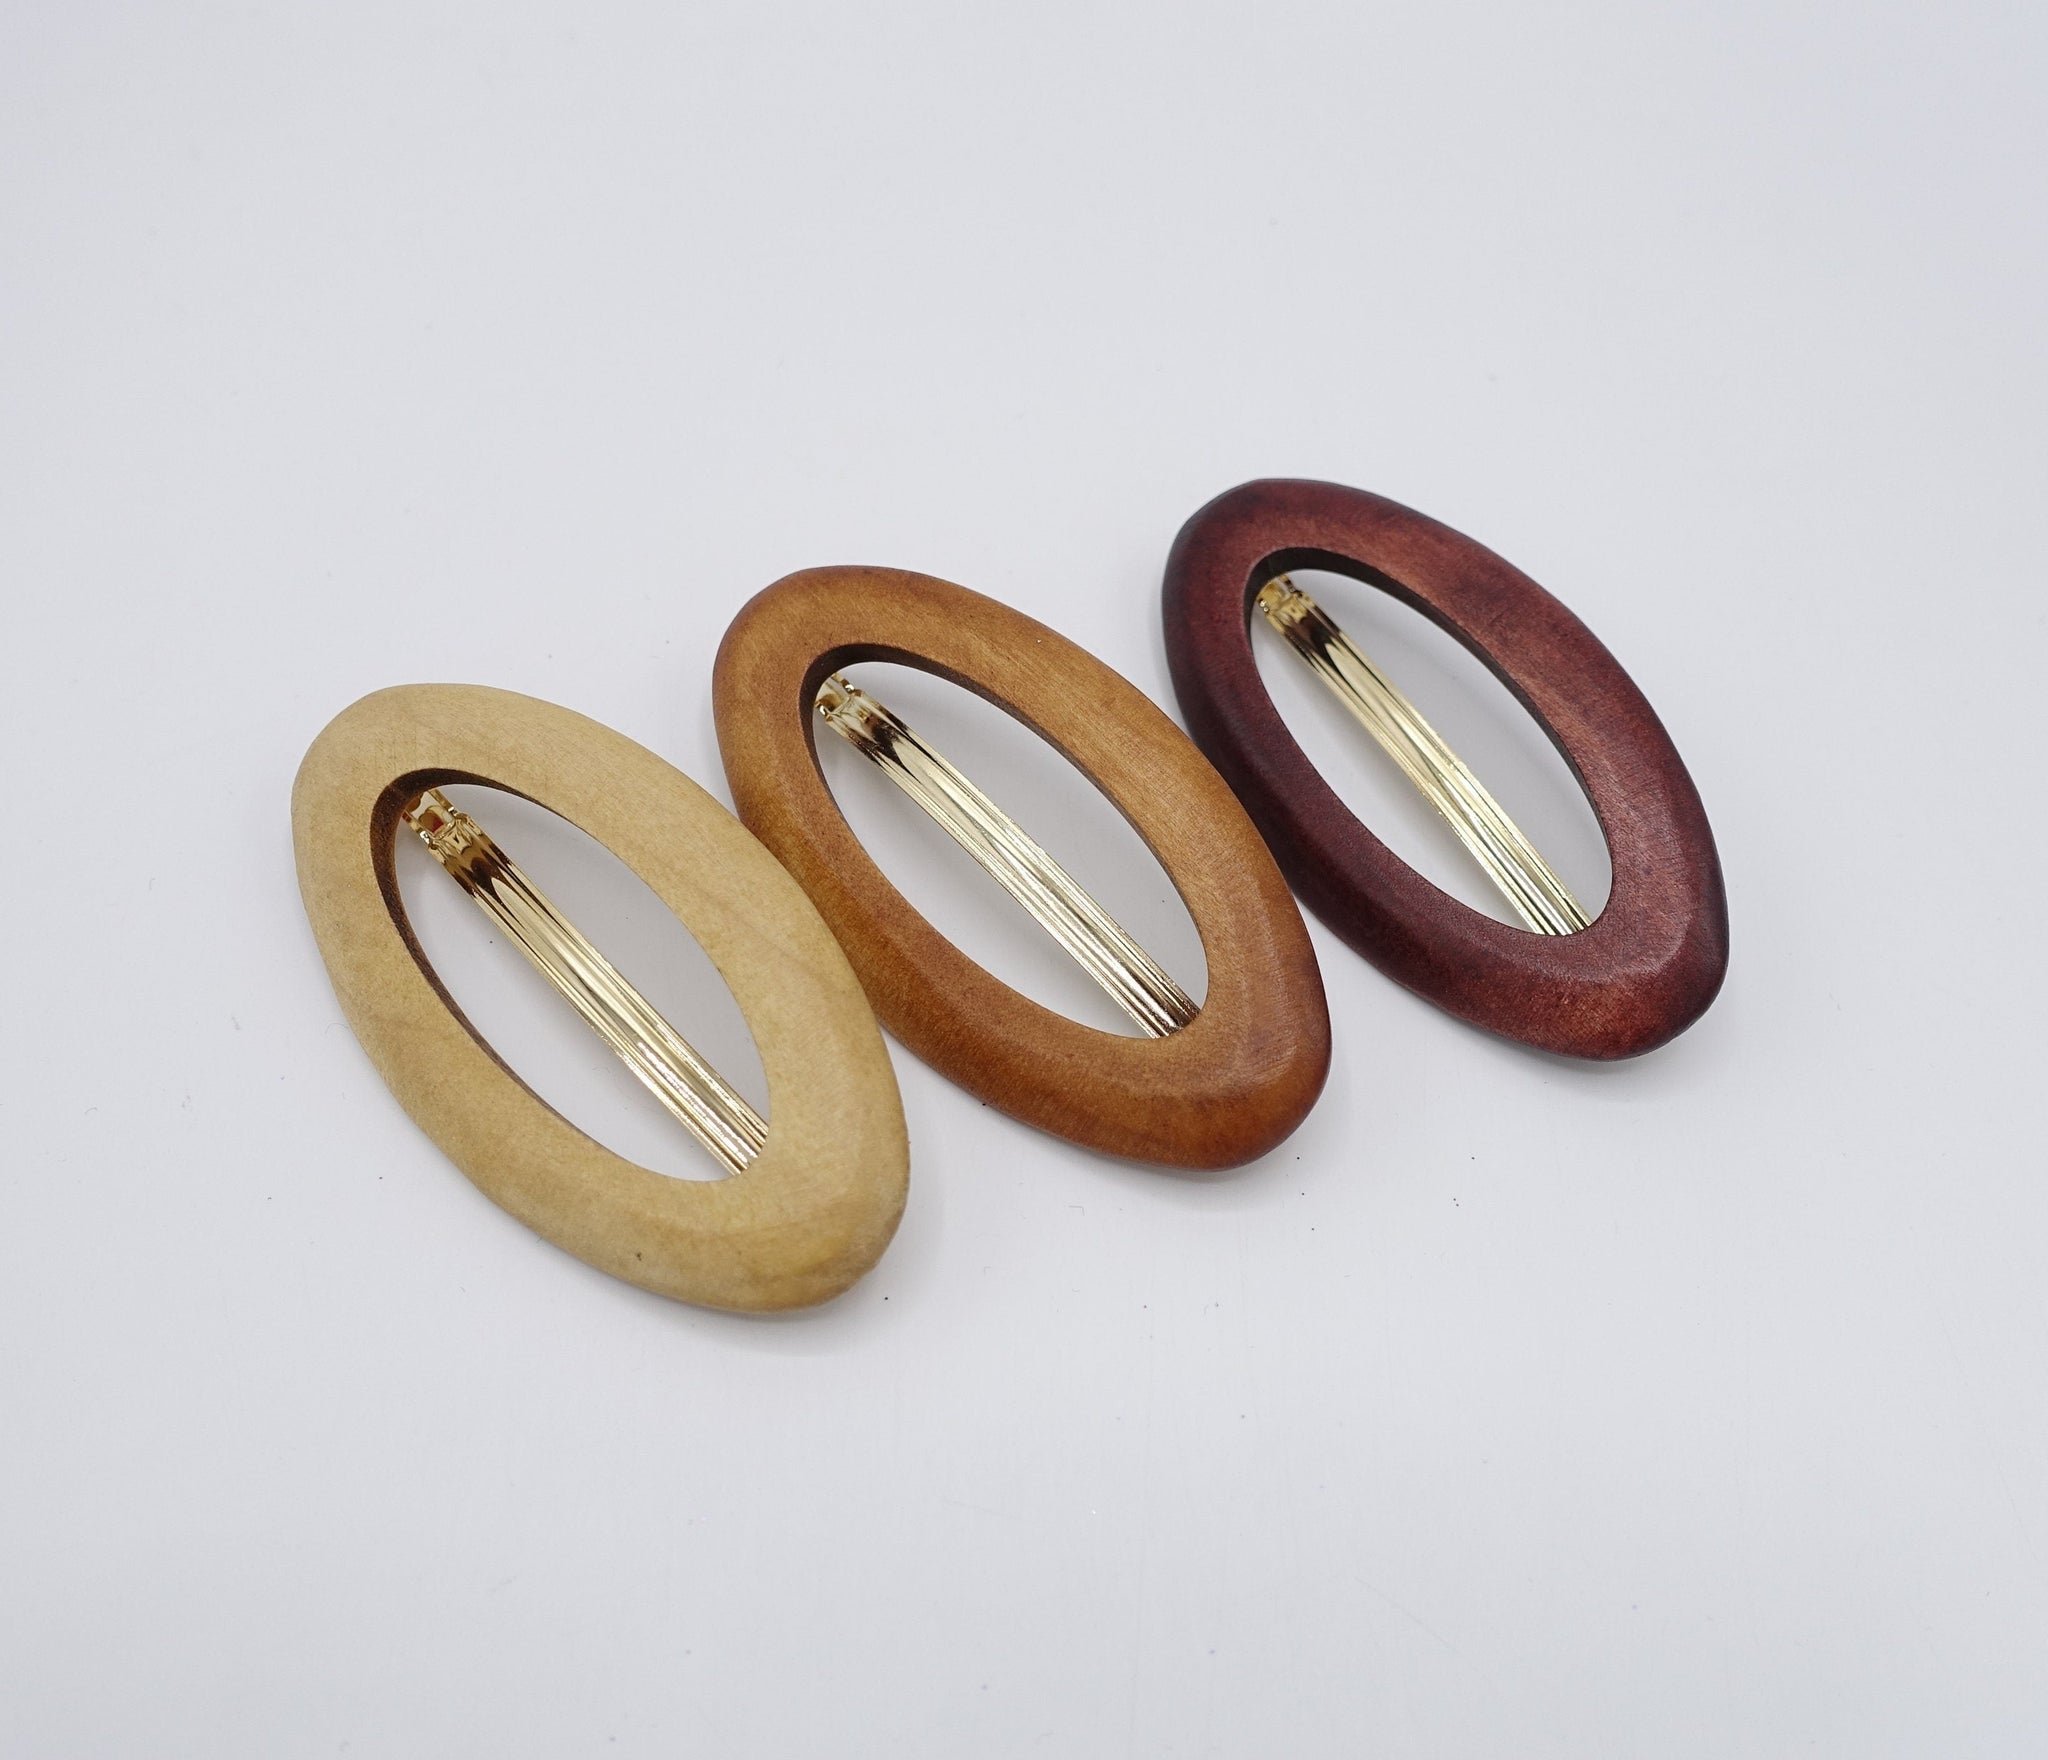 veryshine.com Barrette (Bow) oval wood barrette natural hair accessory for women